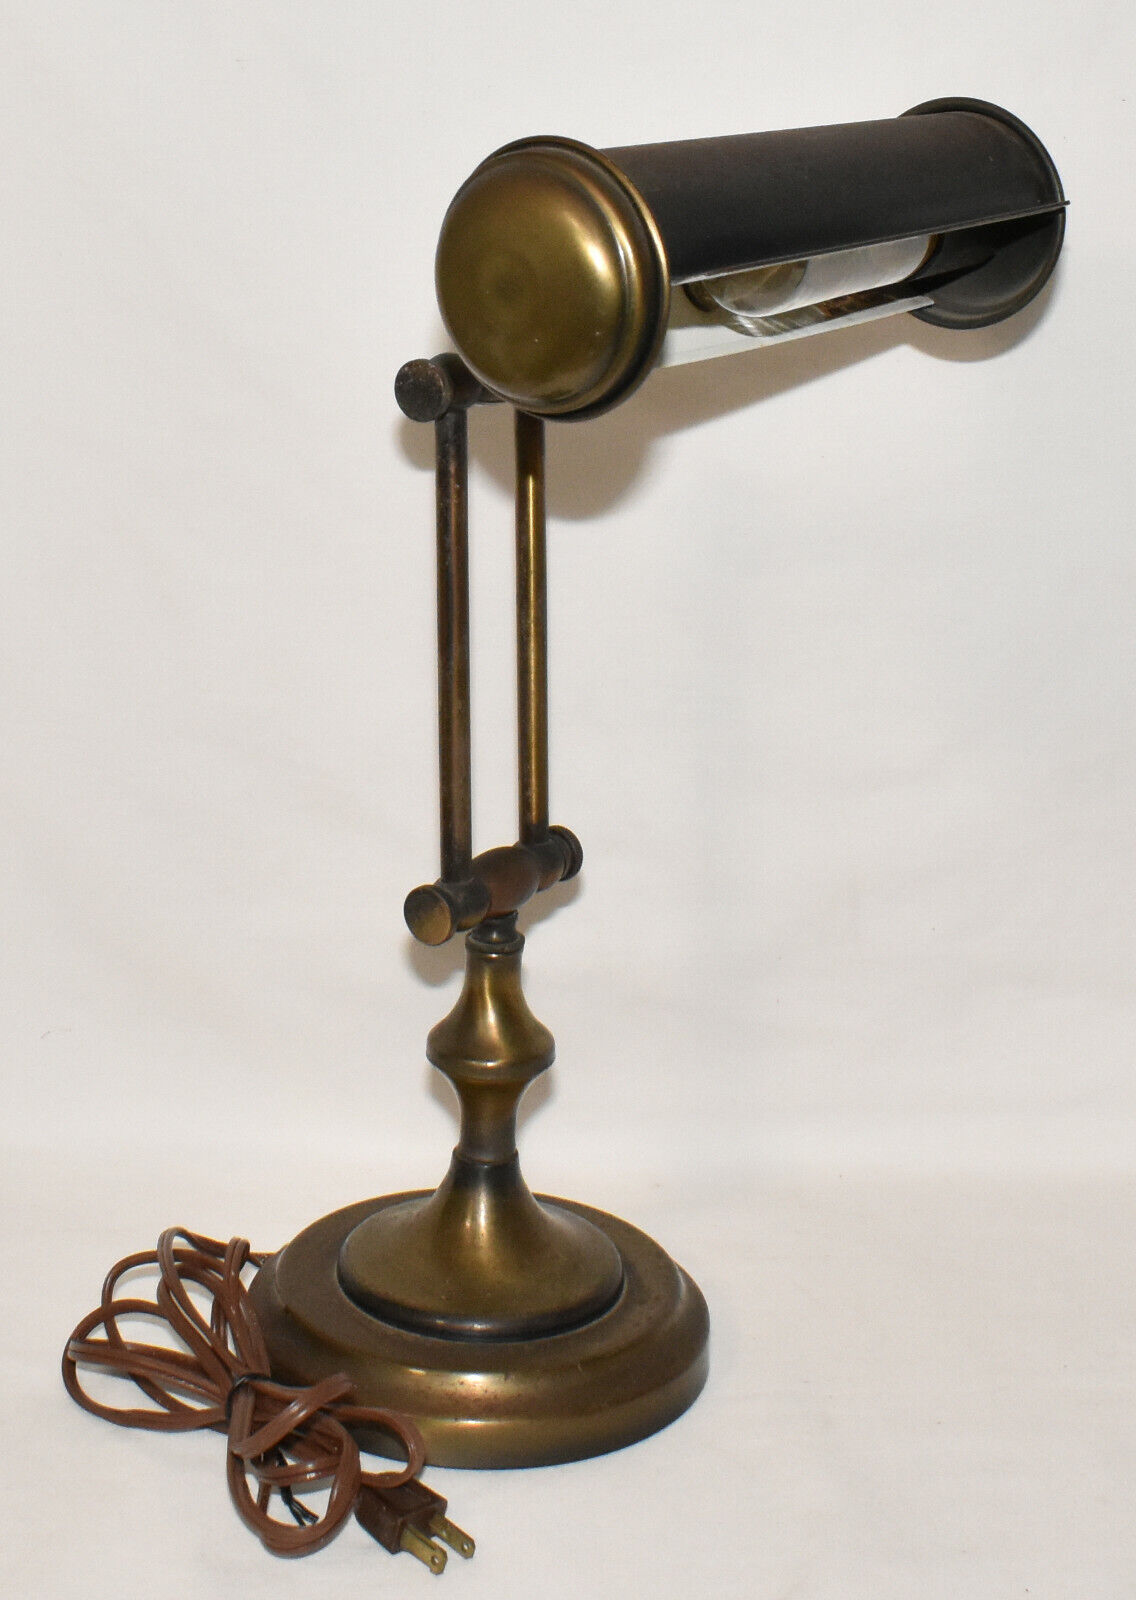 Vintage Brass Adjustable Electric Table Lamp, Piano Lamp, Desk